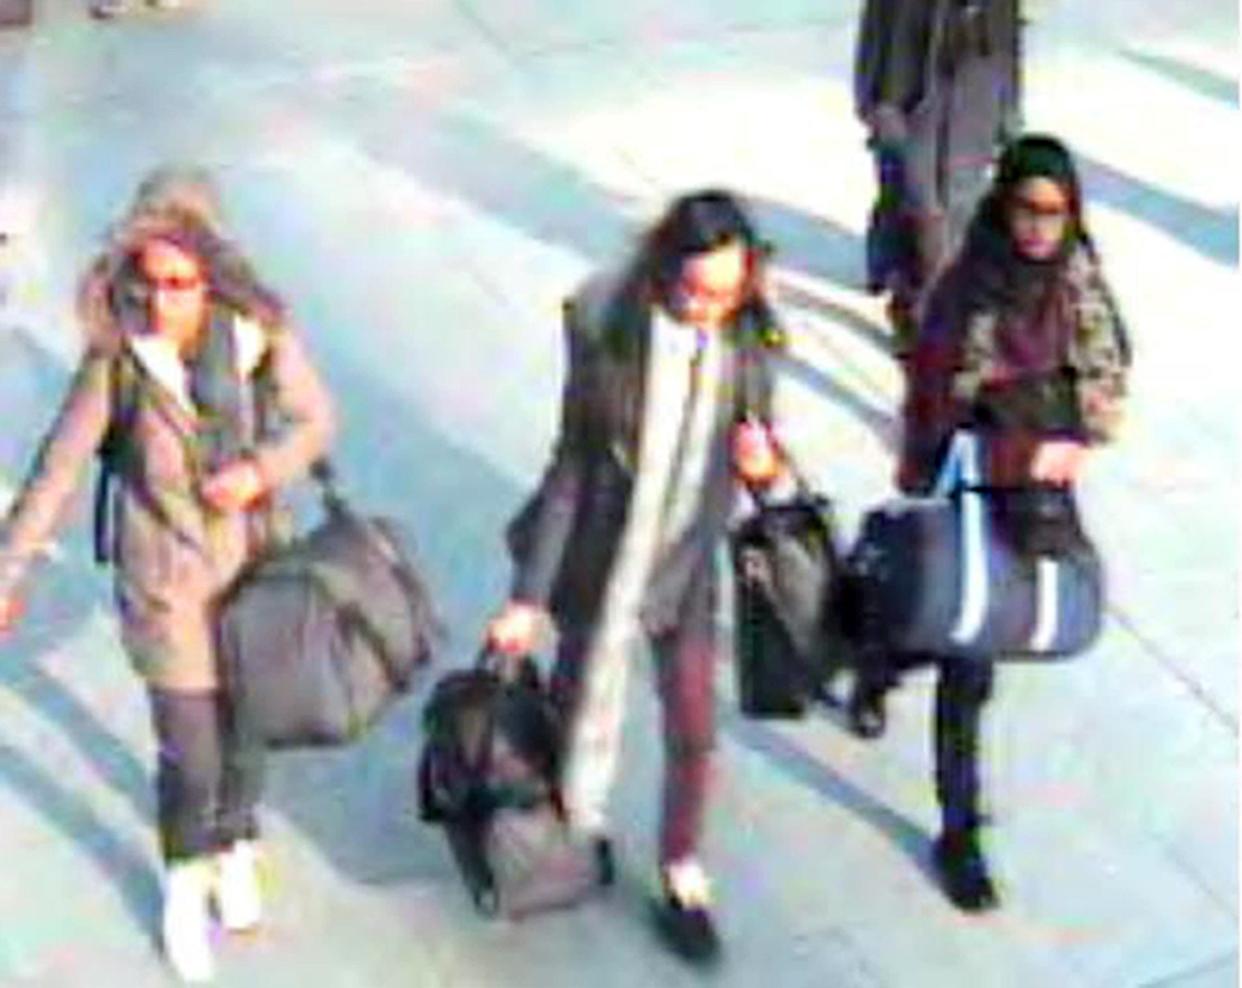 Shamima Begum, right, on CCTV at Gatwick Airport as she fled in 2015 (PA)